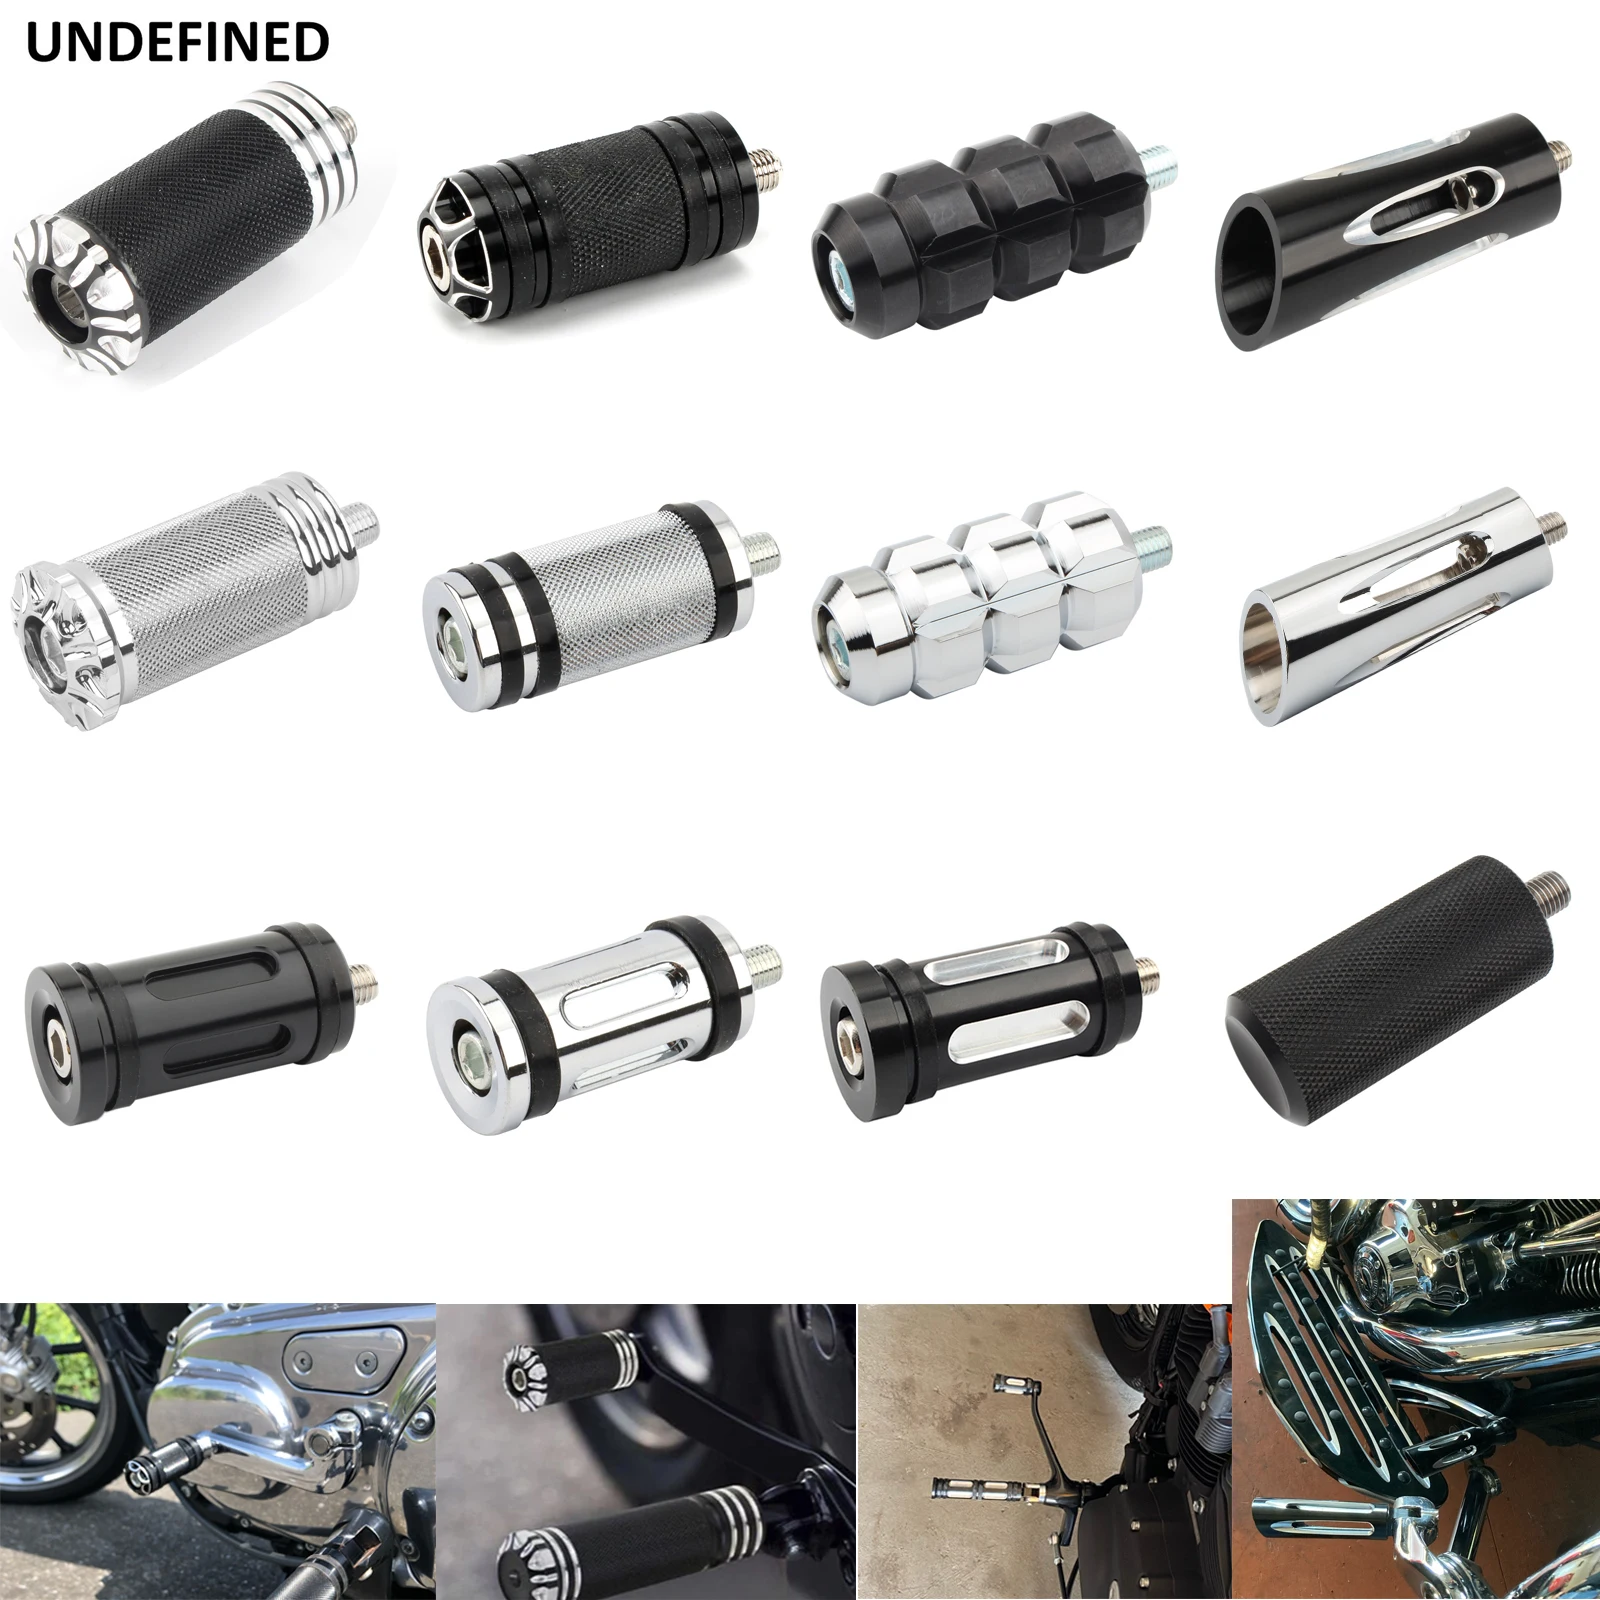 

Motorcycle Shift Gear Lever Shifter Peg Nail for Harley Sportster 883 1200 Softail Breakout Touring Electra Glide Dyna Fat Bob